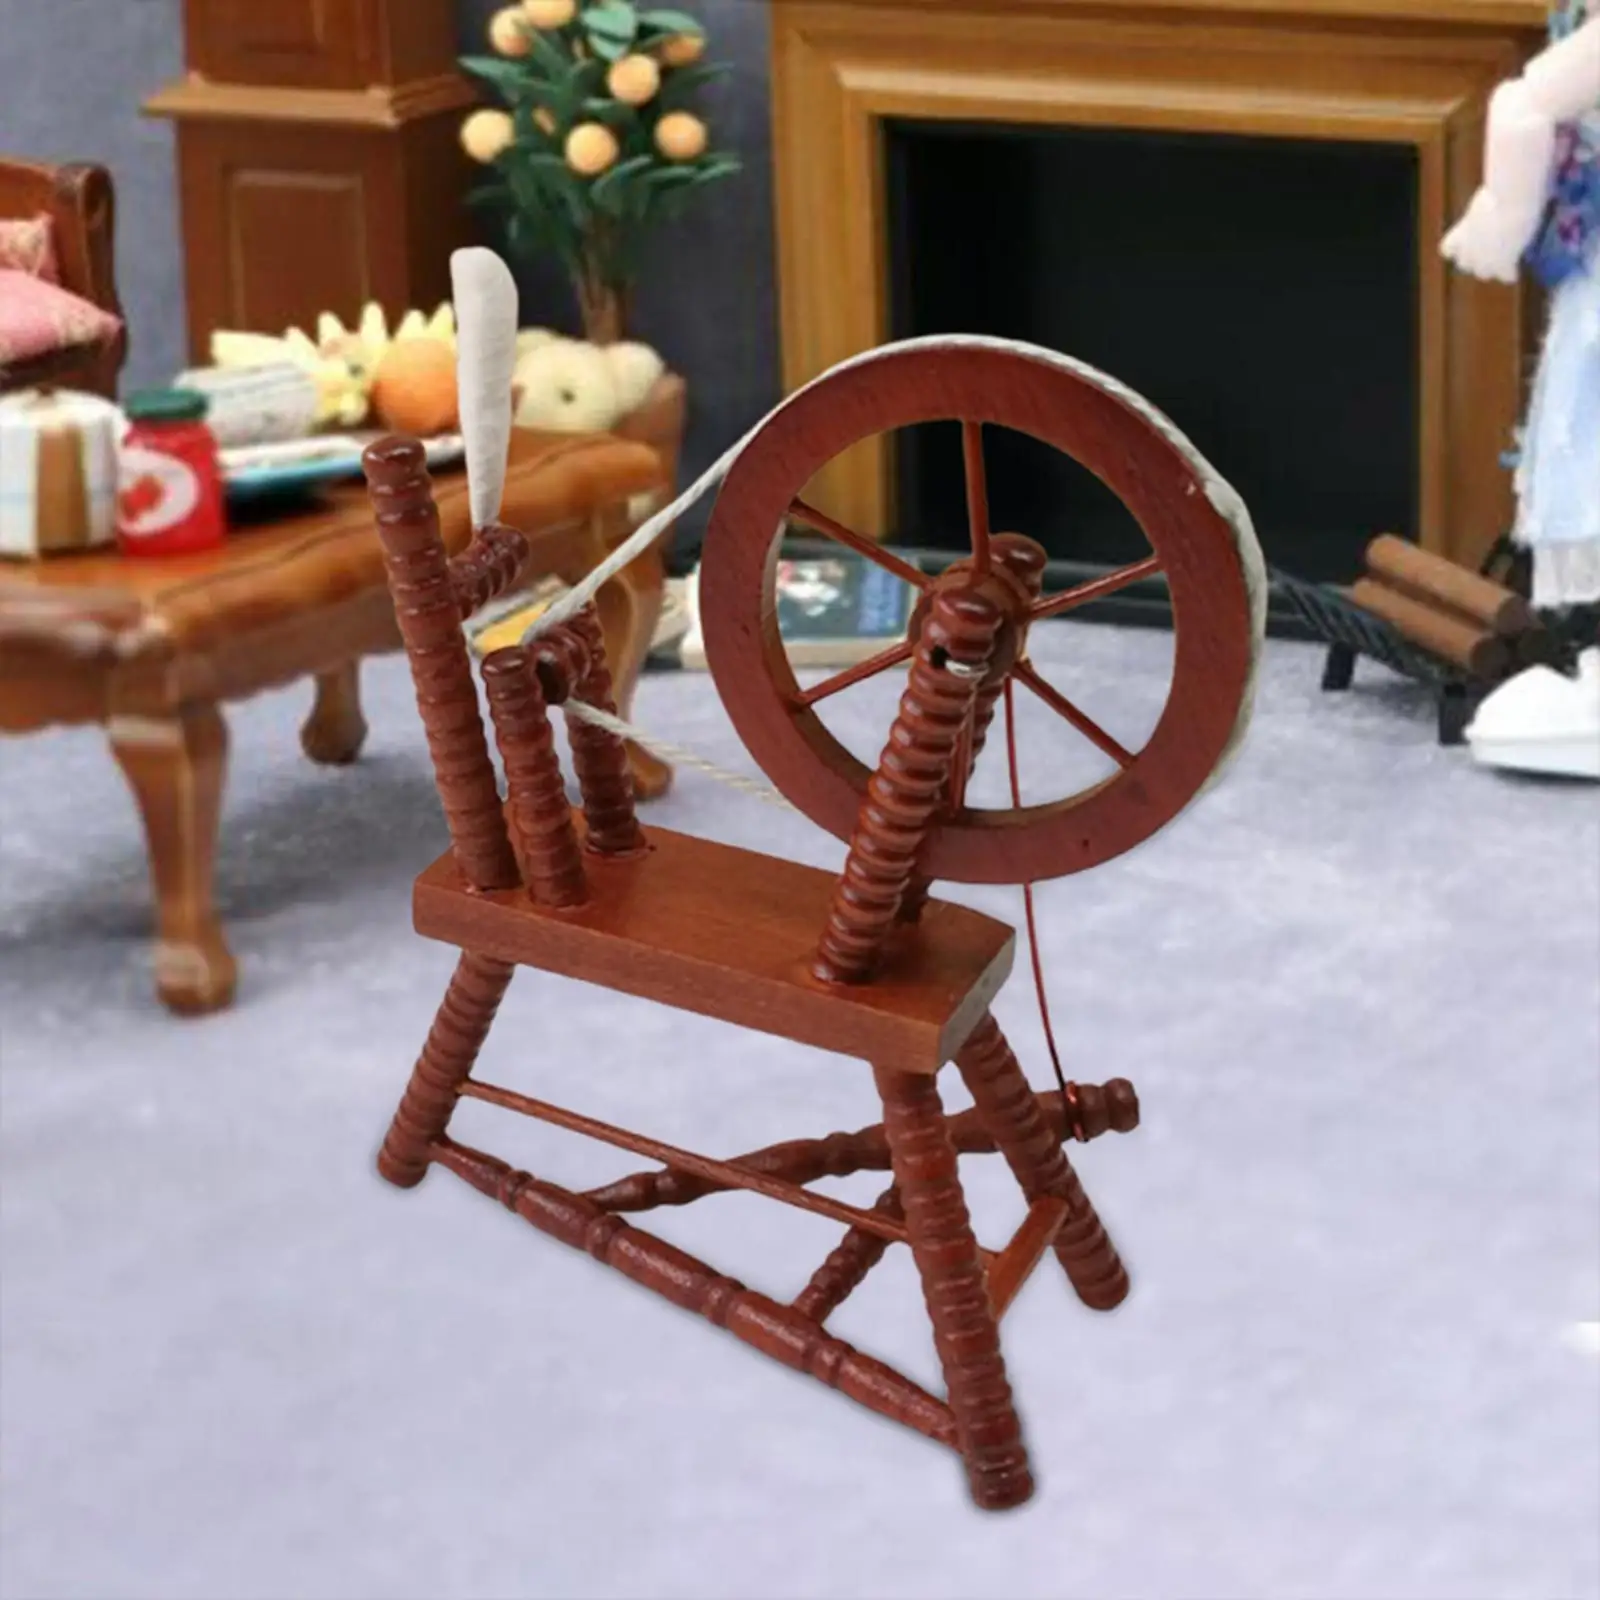 Miniature  Wheel Ornament Pretend Play for Playhouse Toys